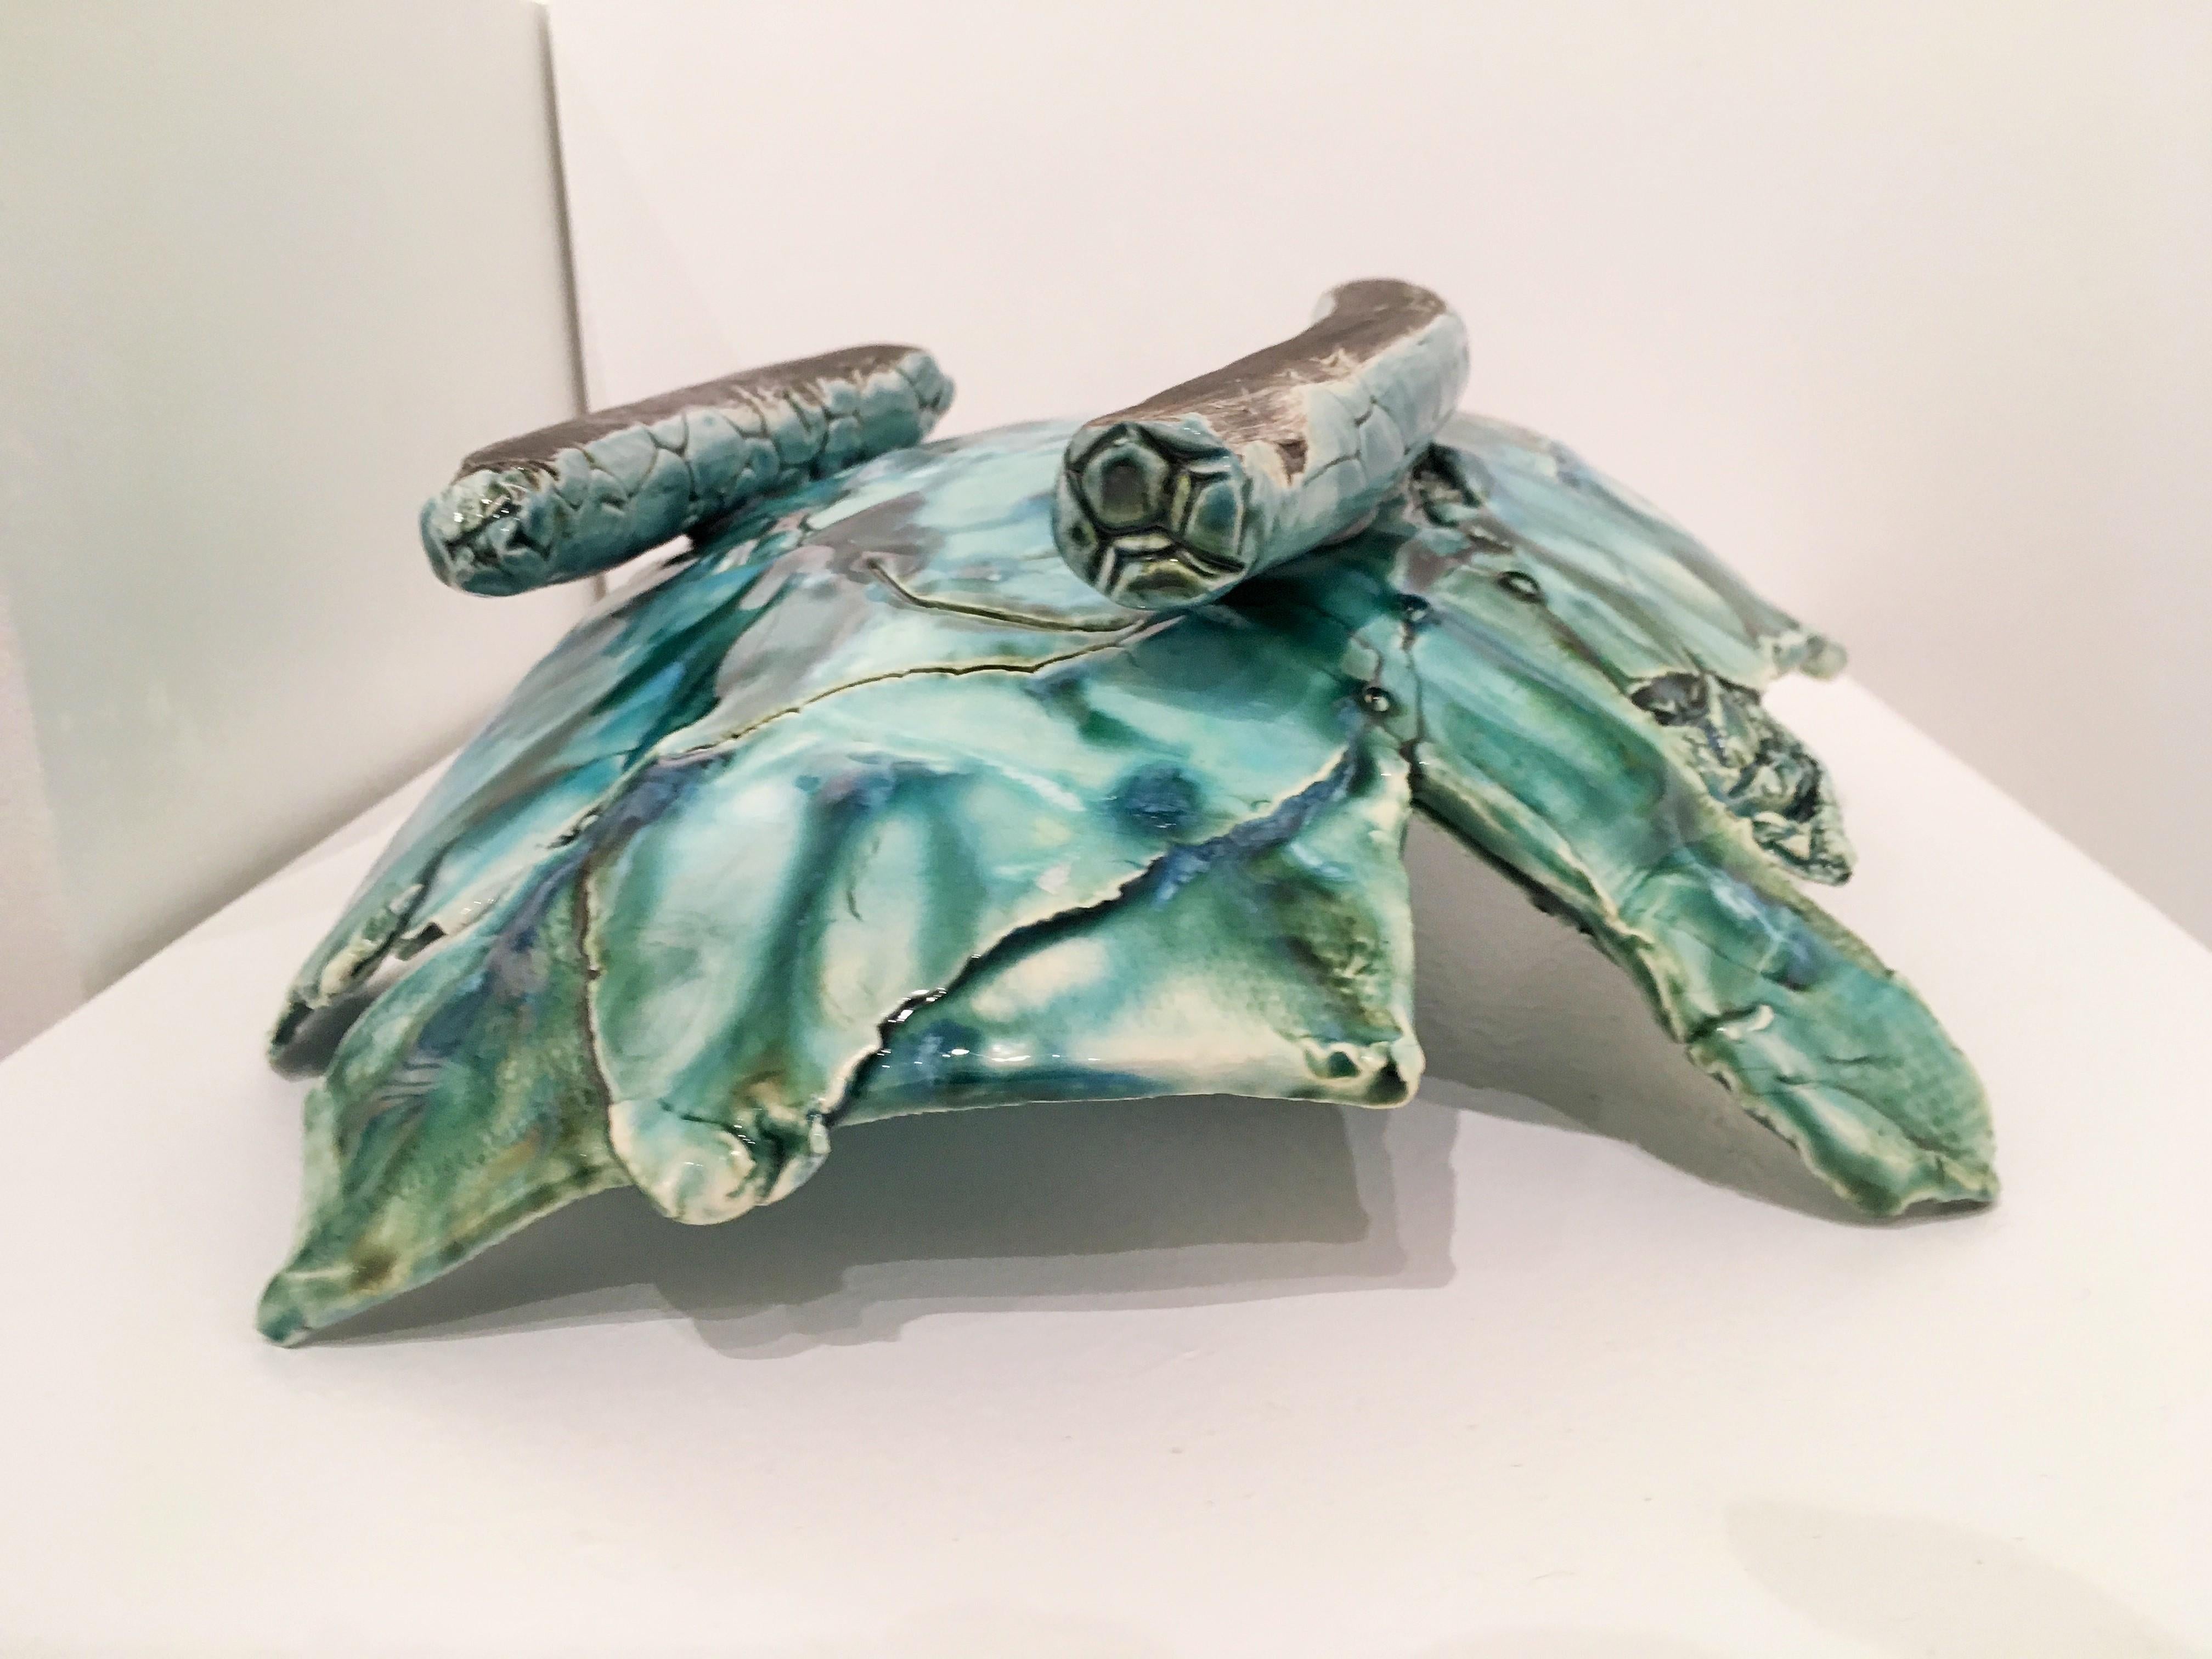 Other Contemporary Ceramic Bowl by Stacey H. Hammond